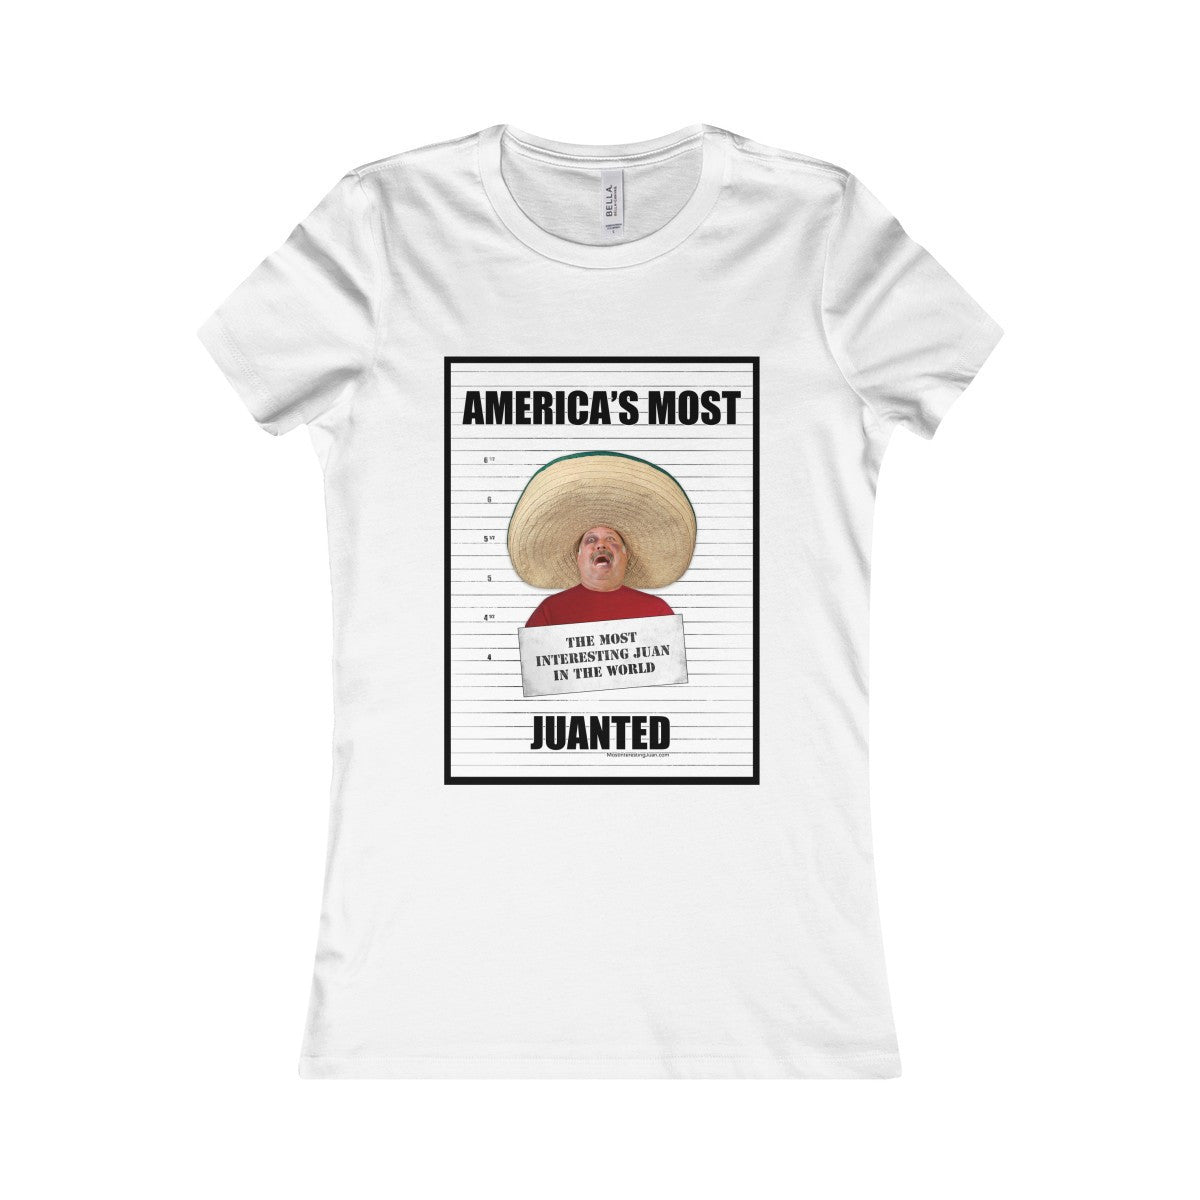 America's Most Juanted - Women's T-shirt